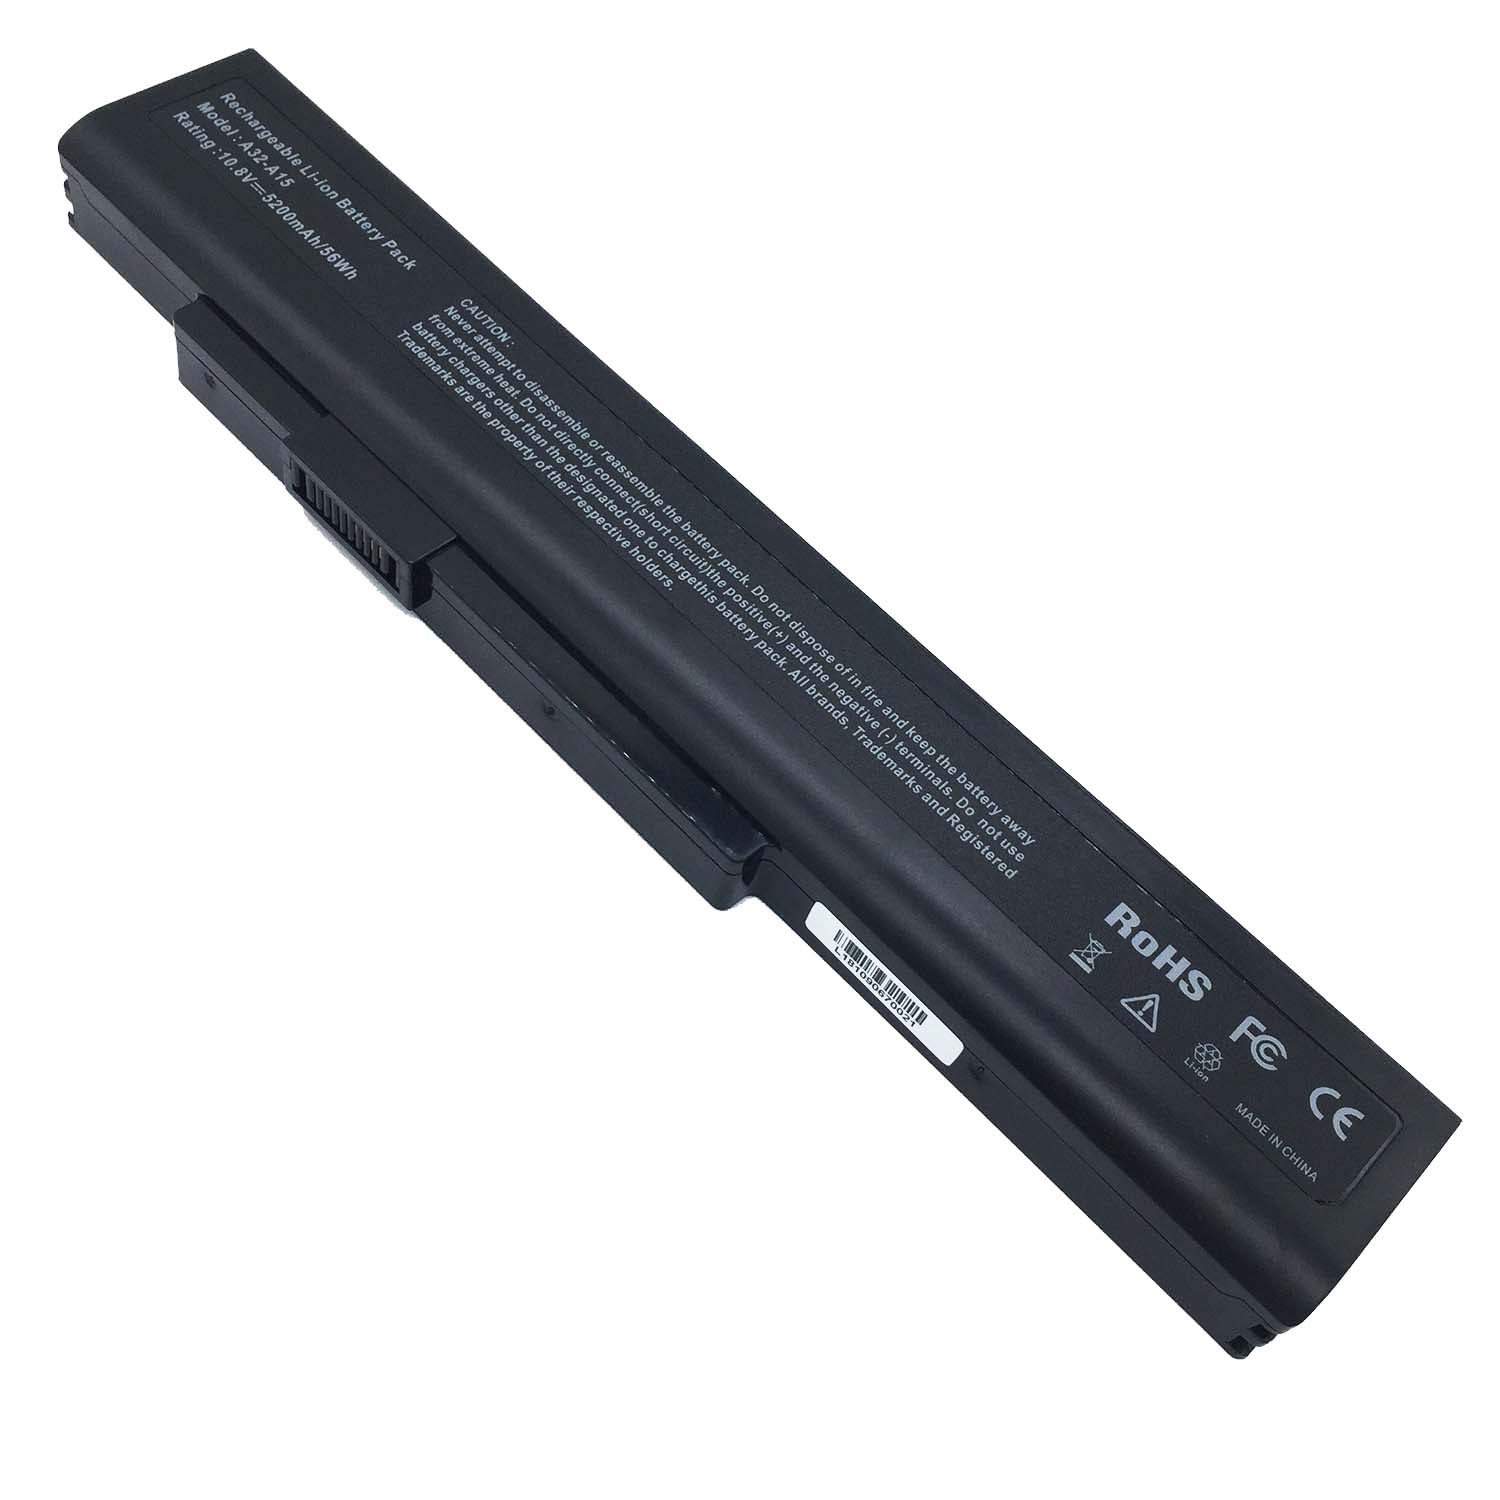 Replacement Battery for Medion Medion Akoya P6631 battery